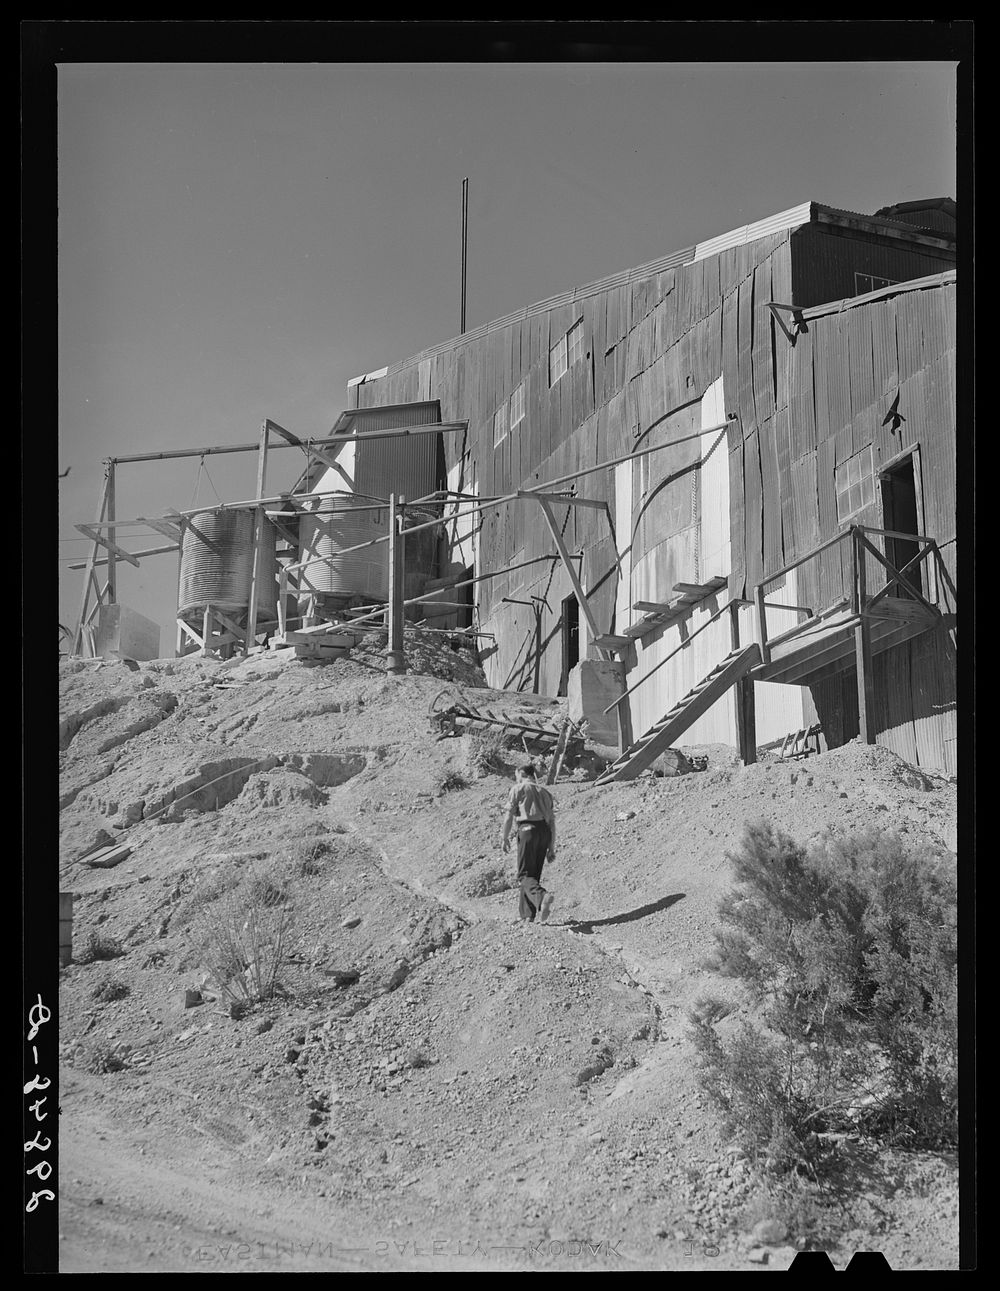 Mill for processing gold and silver ores. El Dorado Canyon, Clark County, Nevada. Sourced from the Library of Congress.